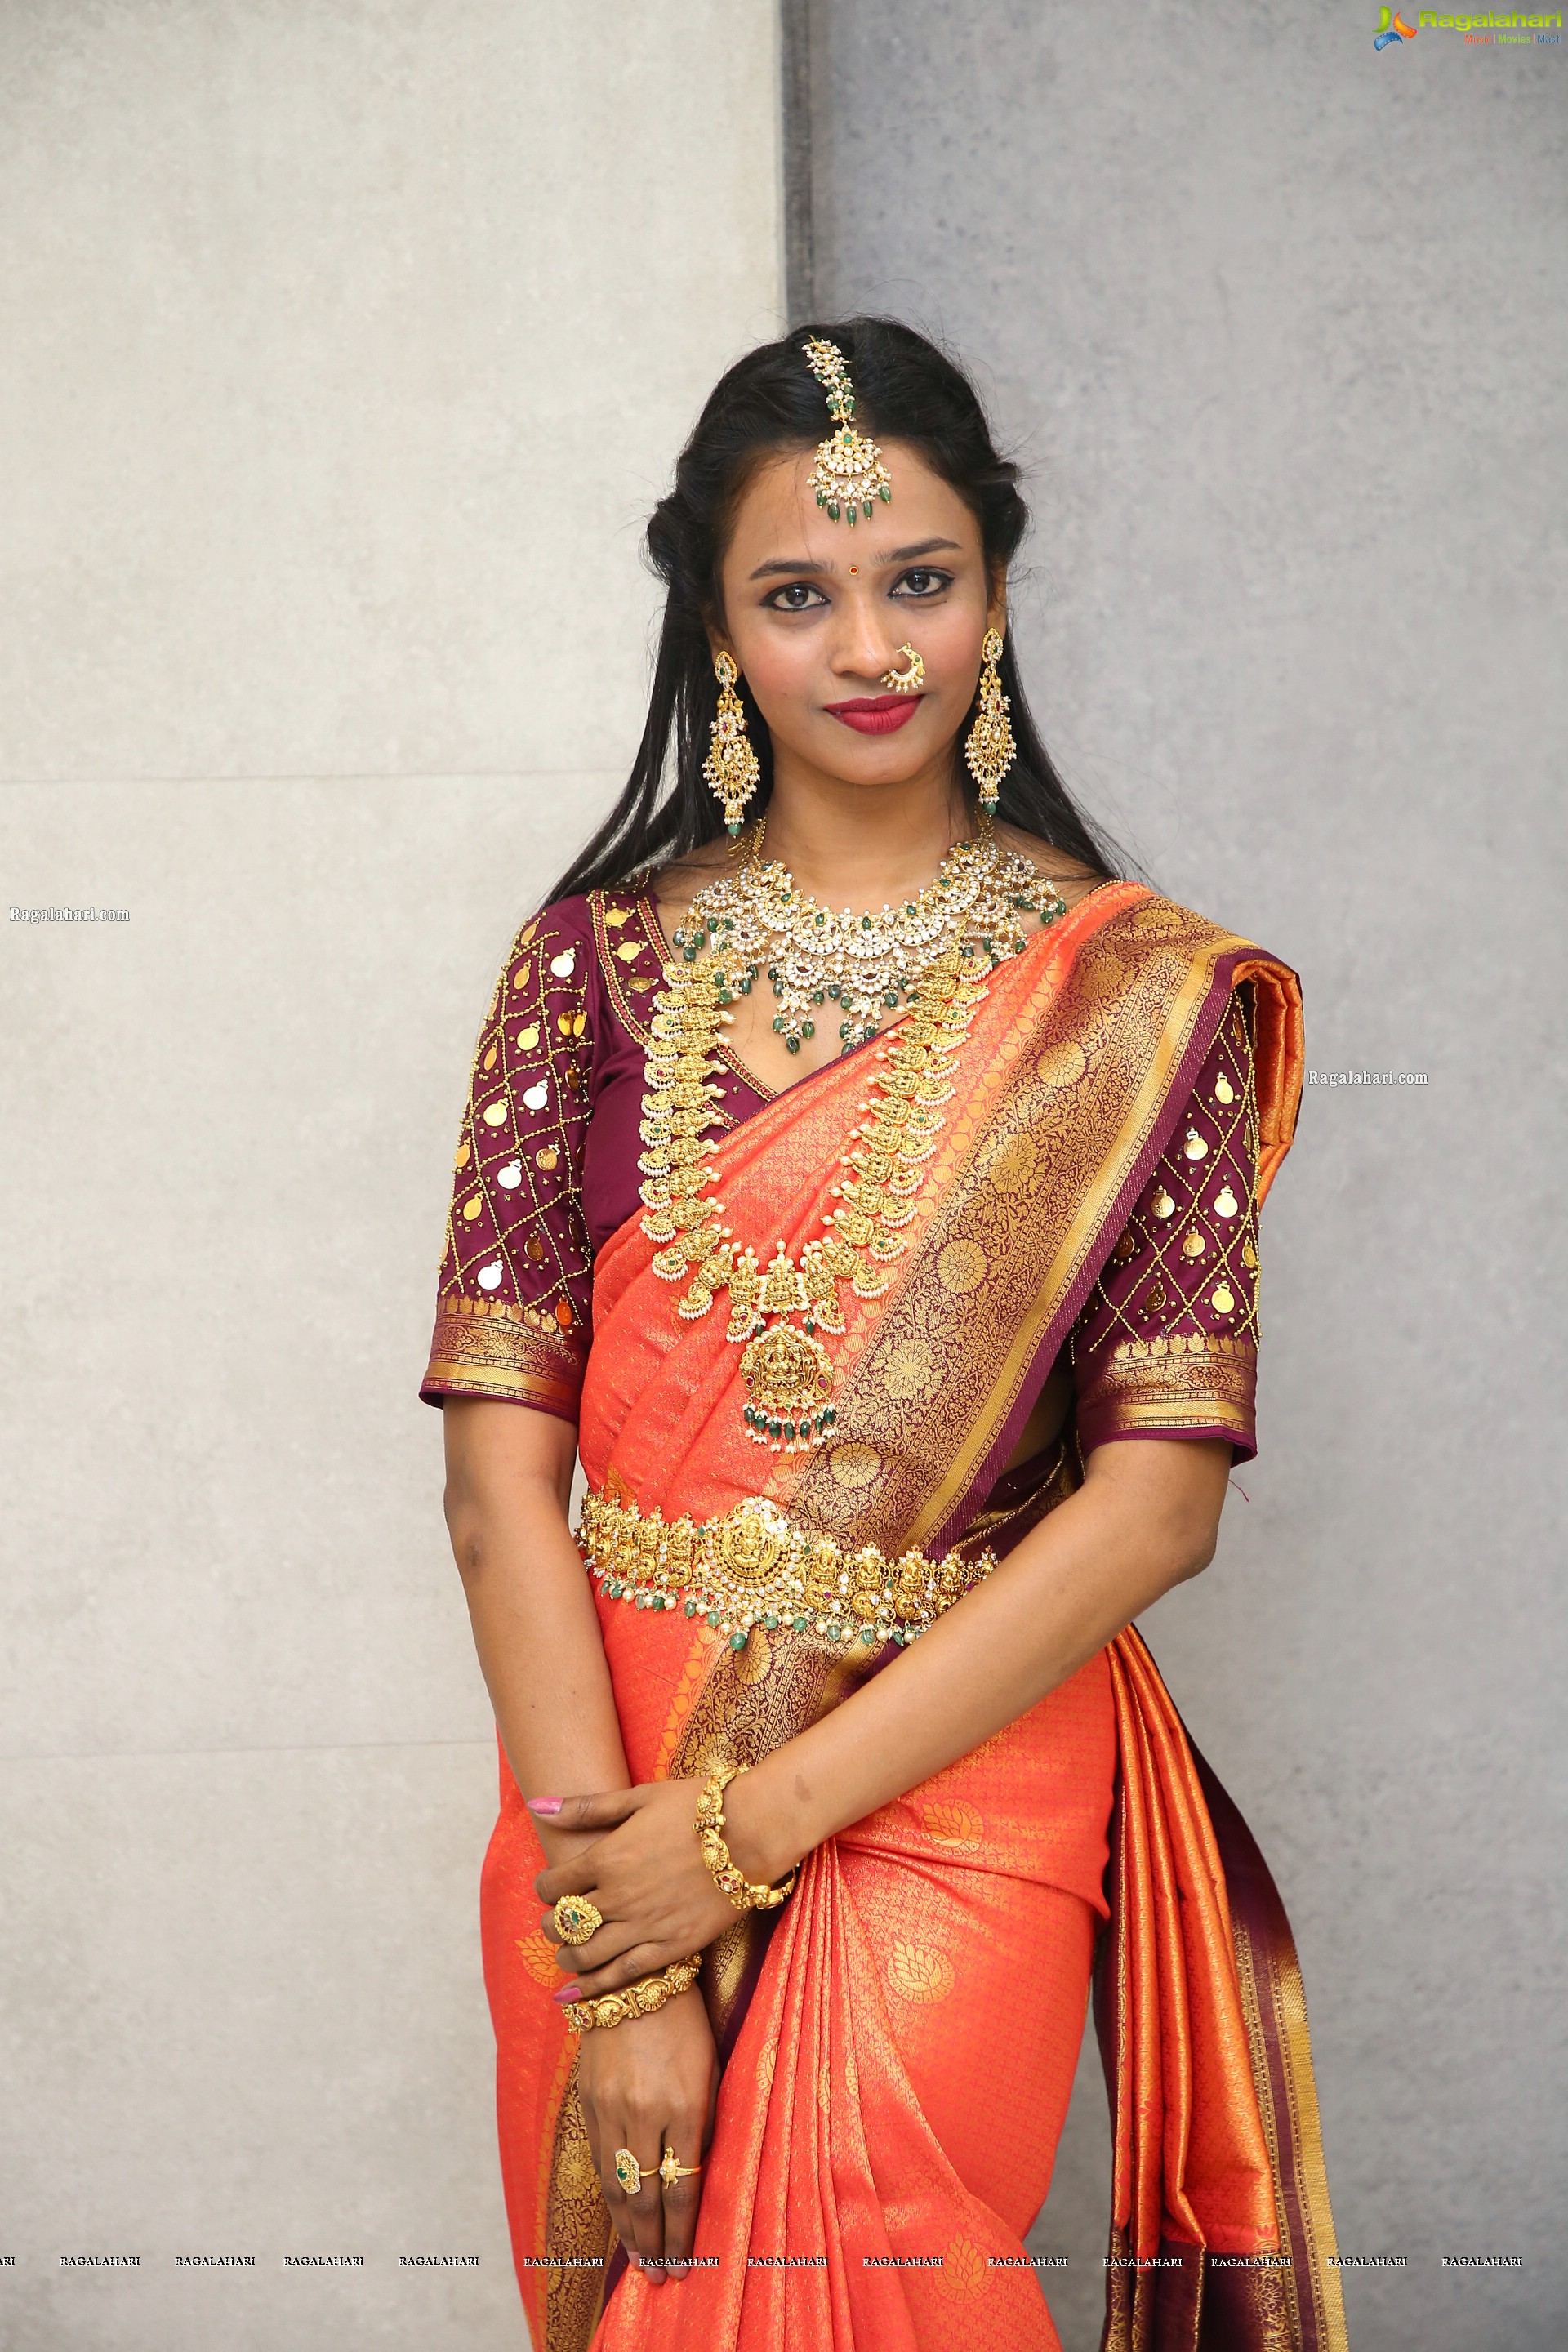 Rupa Poses With Traditional Jewellery, HD Photo Gallery